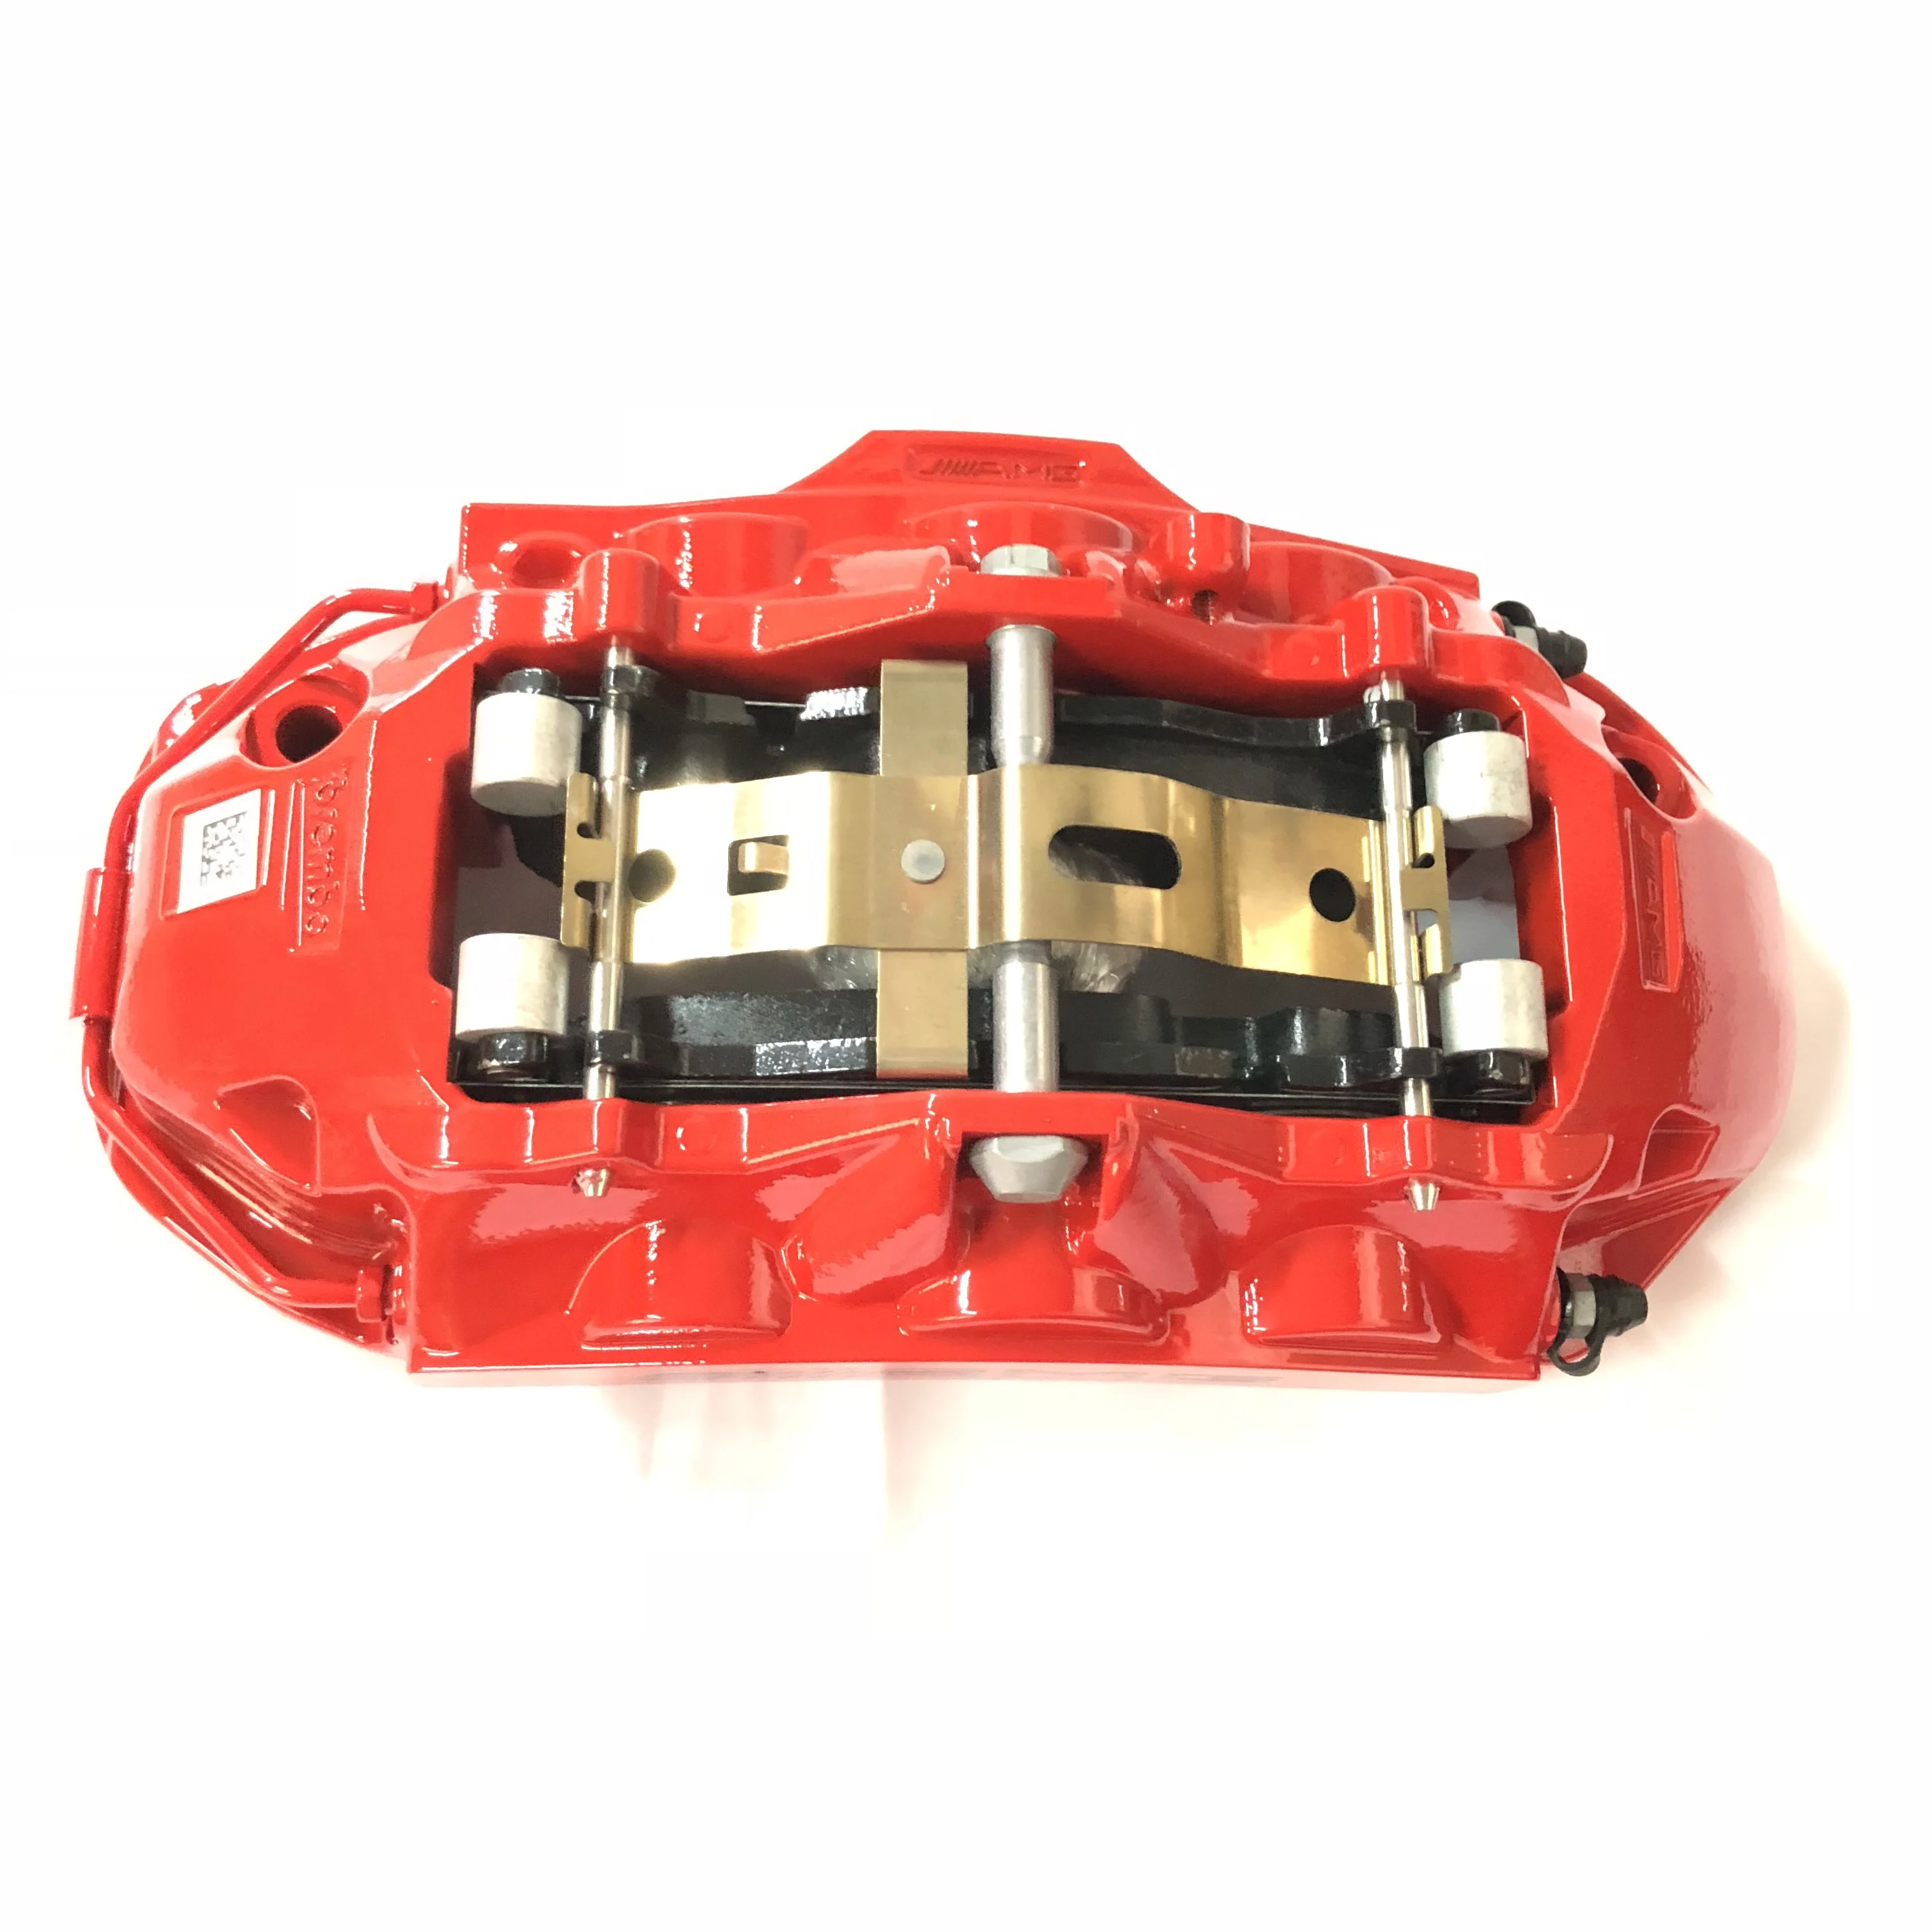 

High performance JKAMG6 gold red caliper 390*36mm brake disc set for A4L A4 A5 A7 A8 S5 Q5 A4 S3 8P 8V car brake system